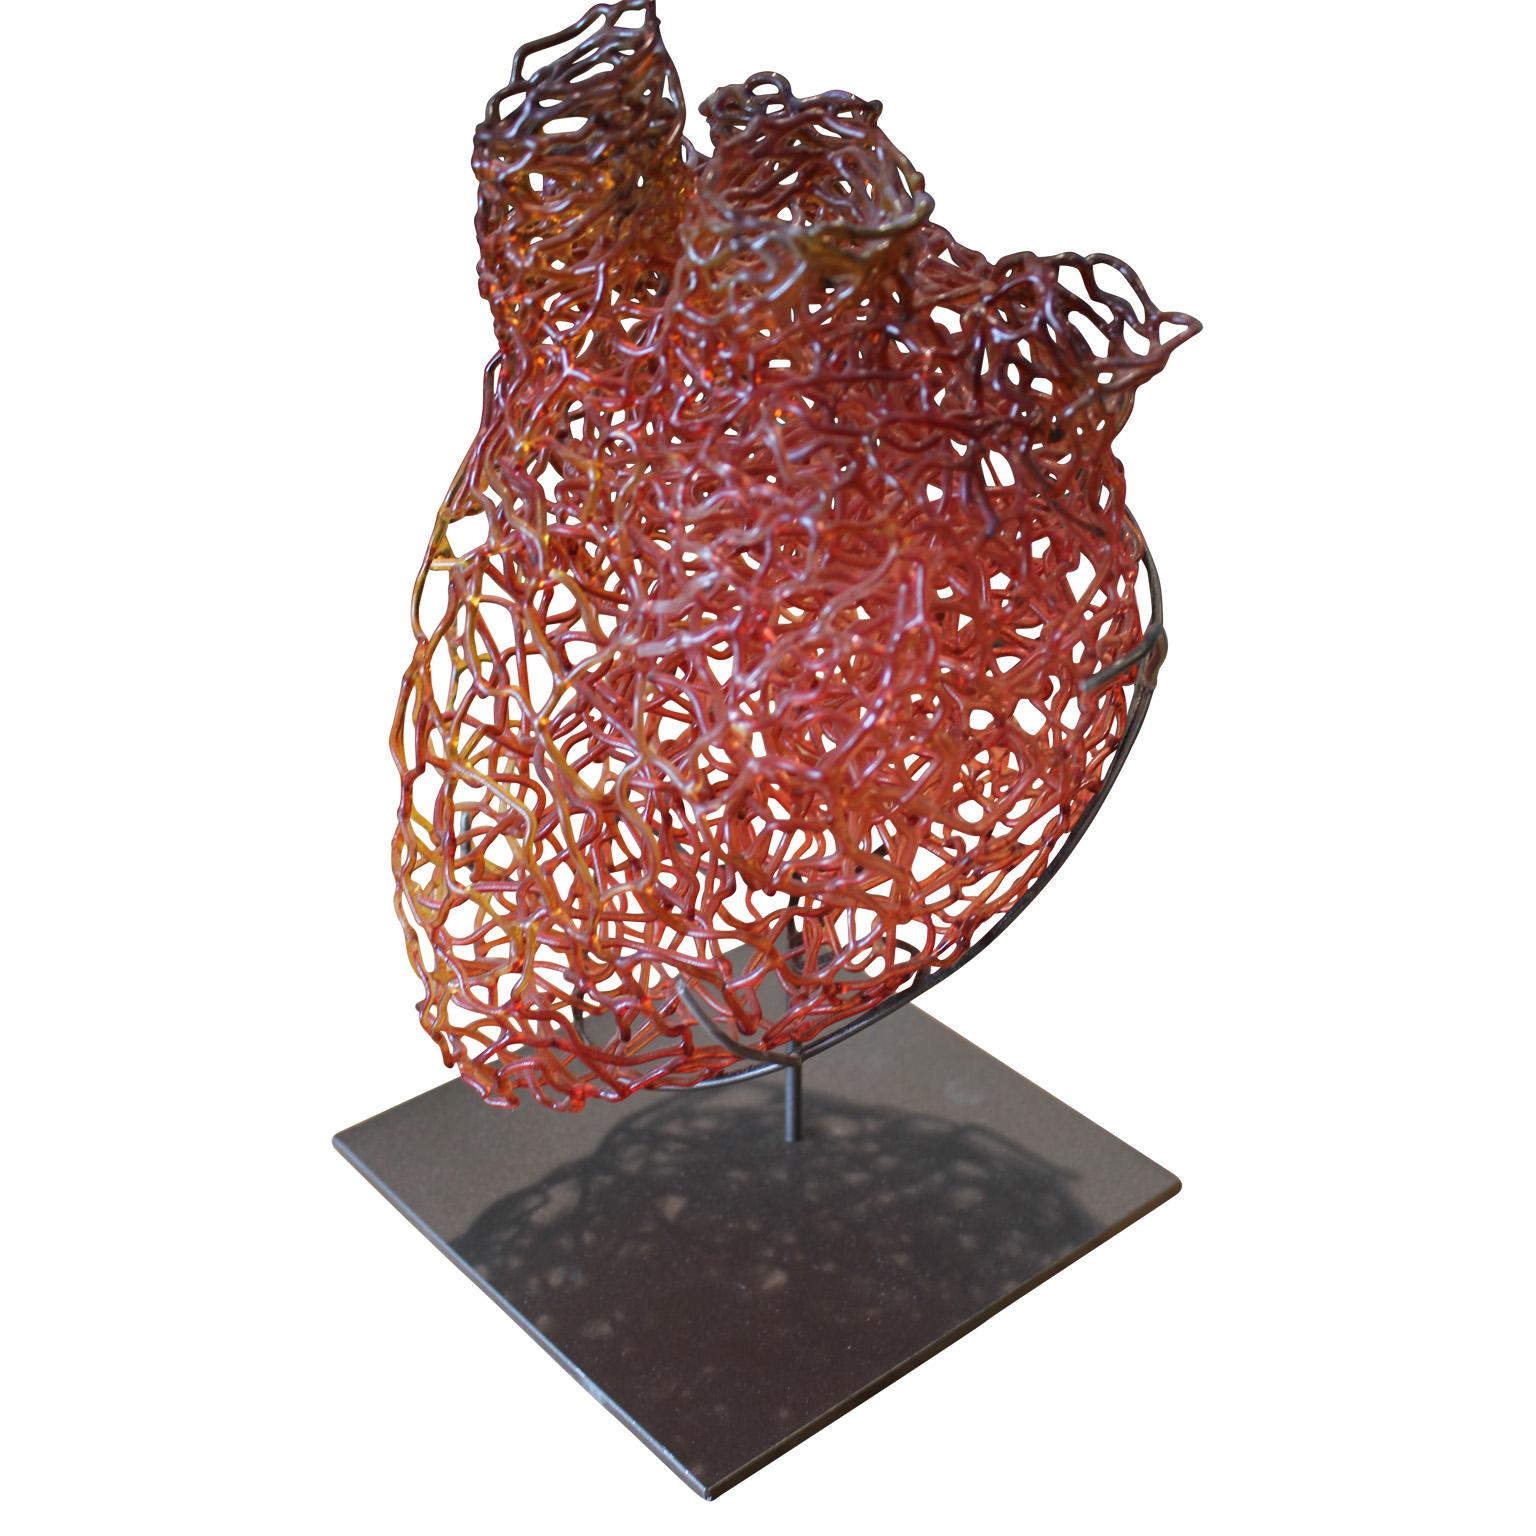 Unknown Abstract Sculpture - Blown Glass Red and Orange Anatomical Heart Sculpture